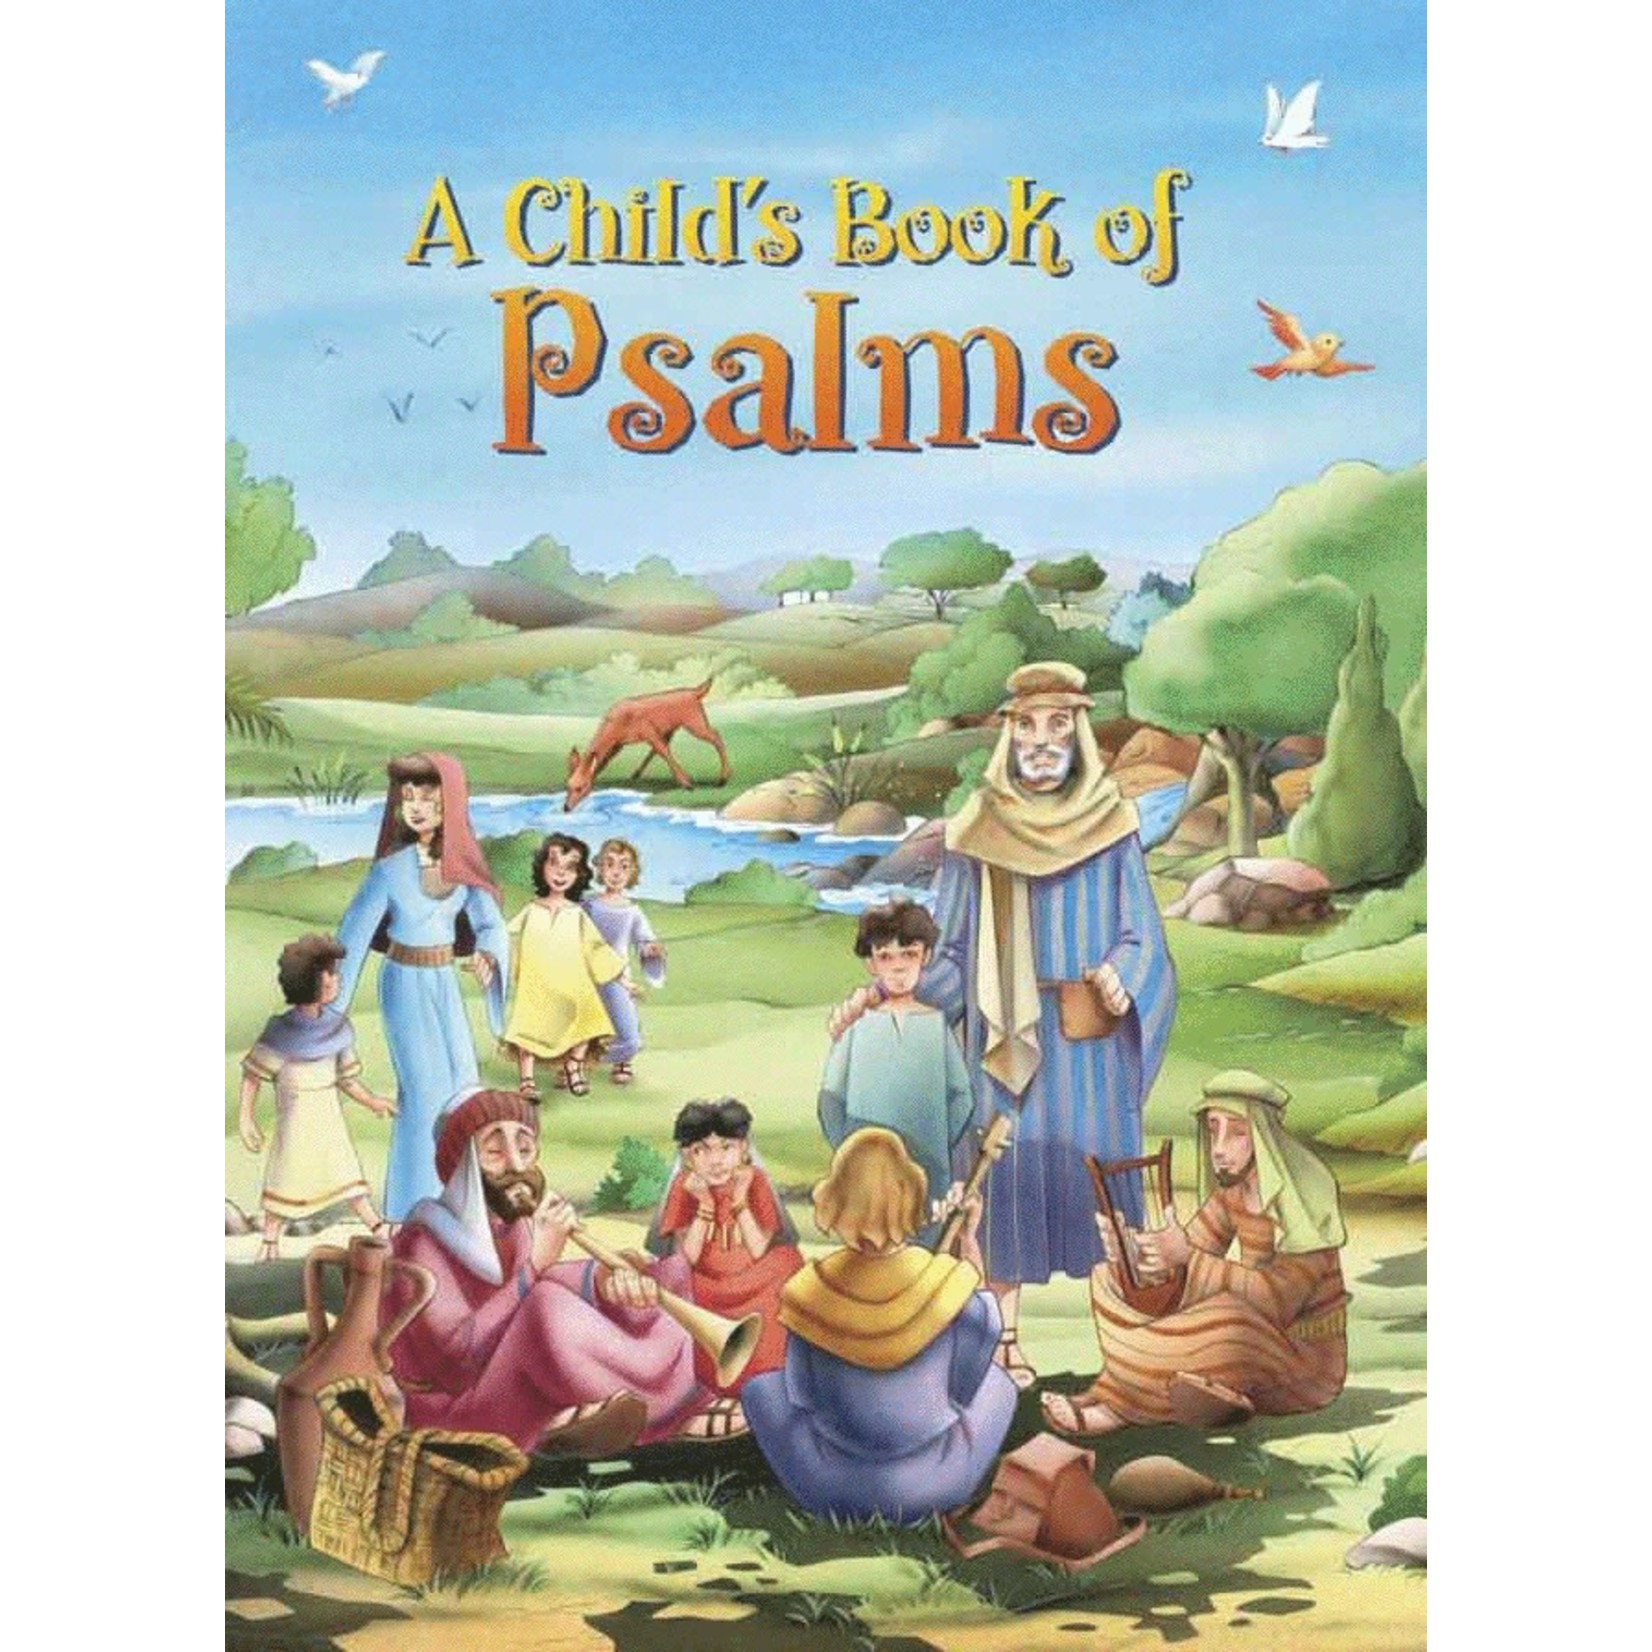 A Childs Book of Psalms